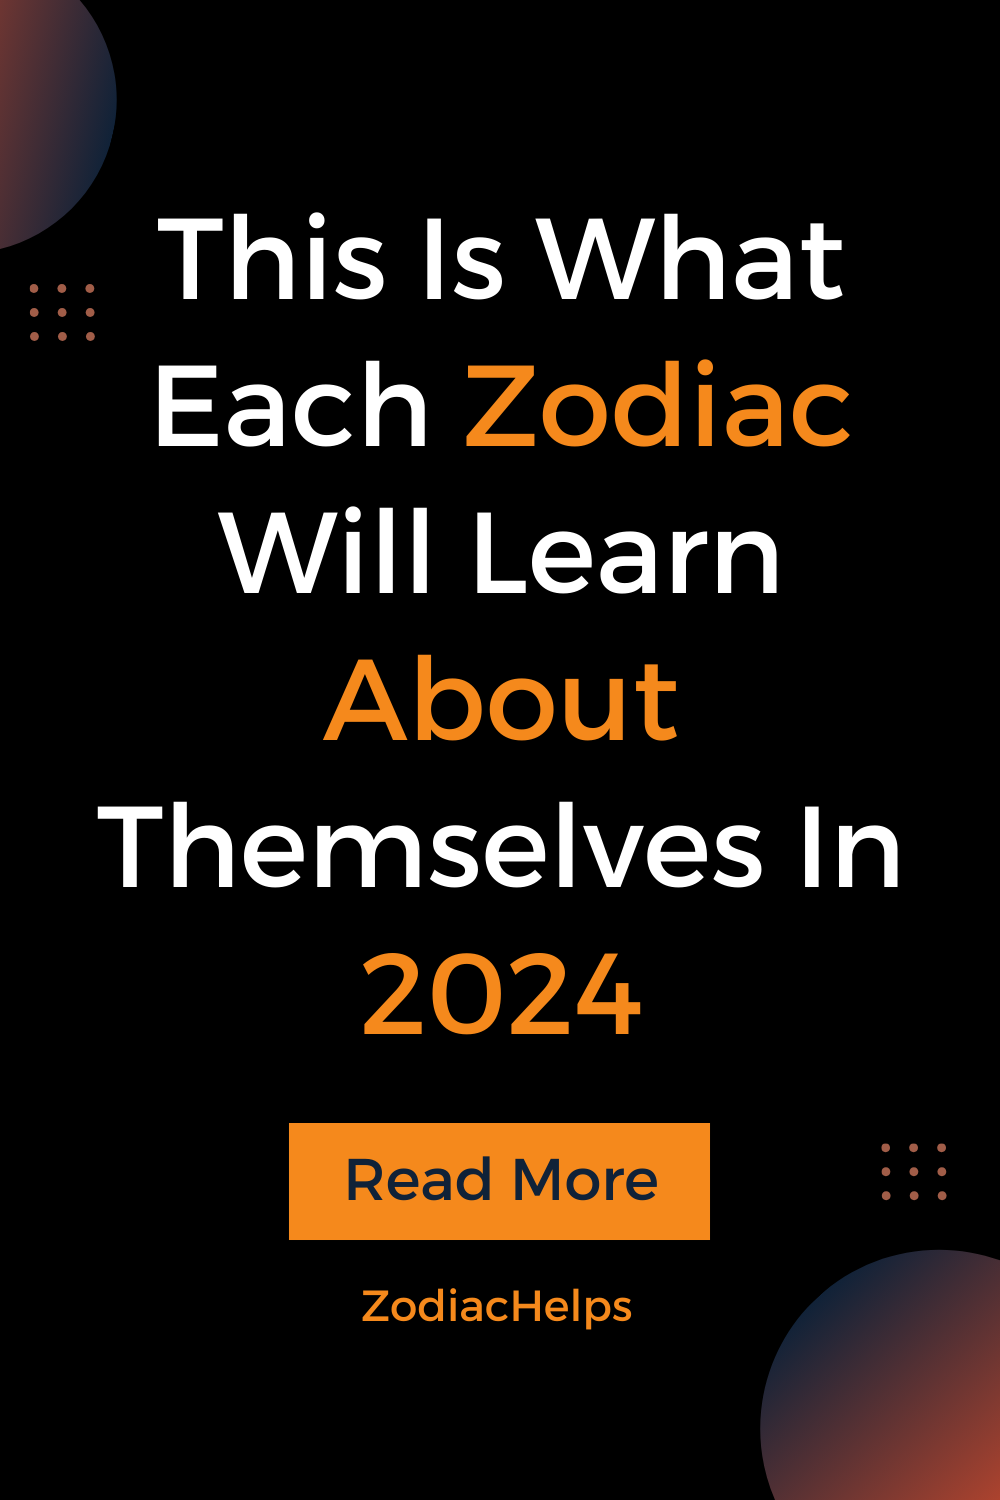 This Is What Each Zodiac Will Learn About Themselves In 2024